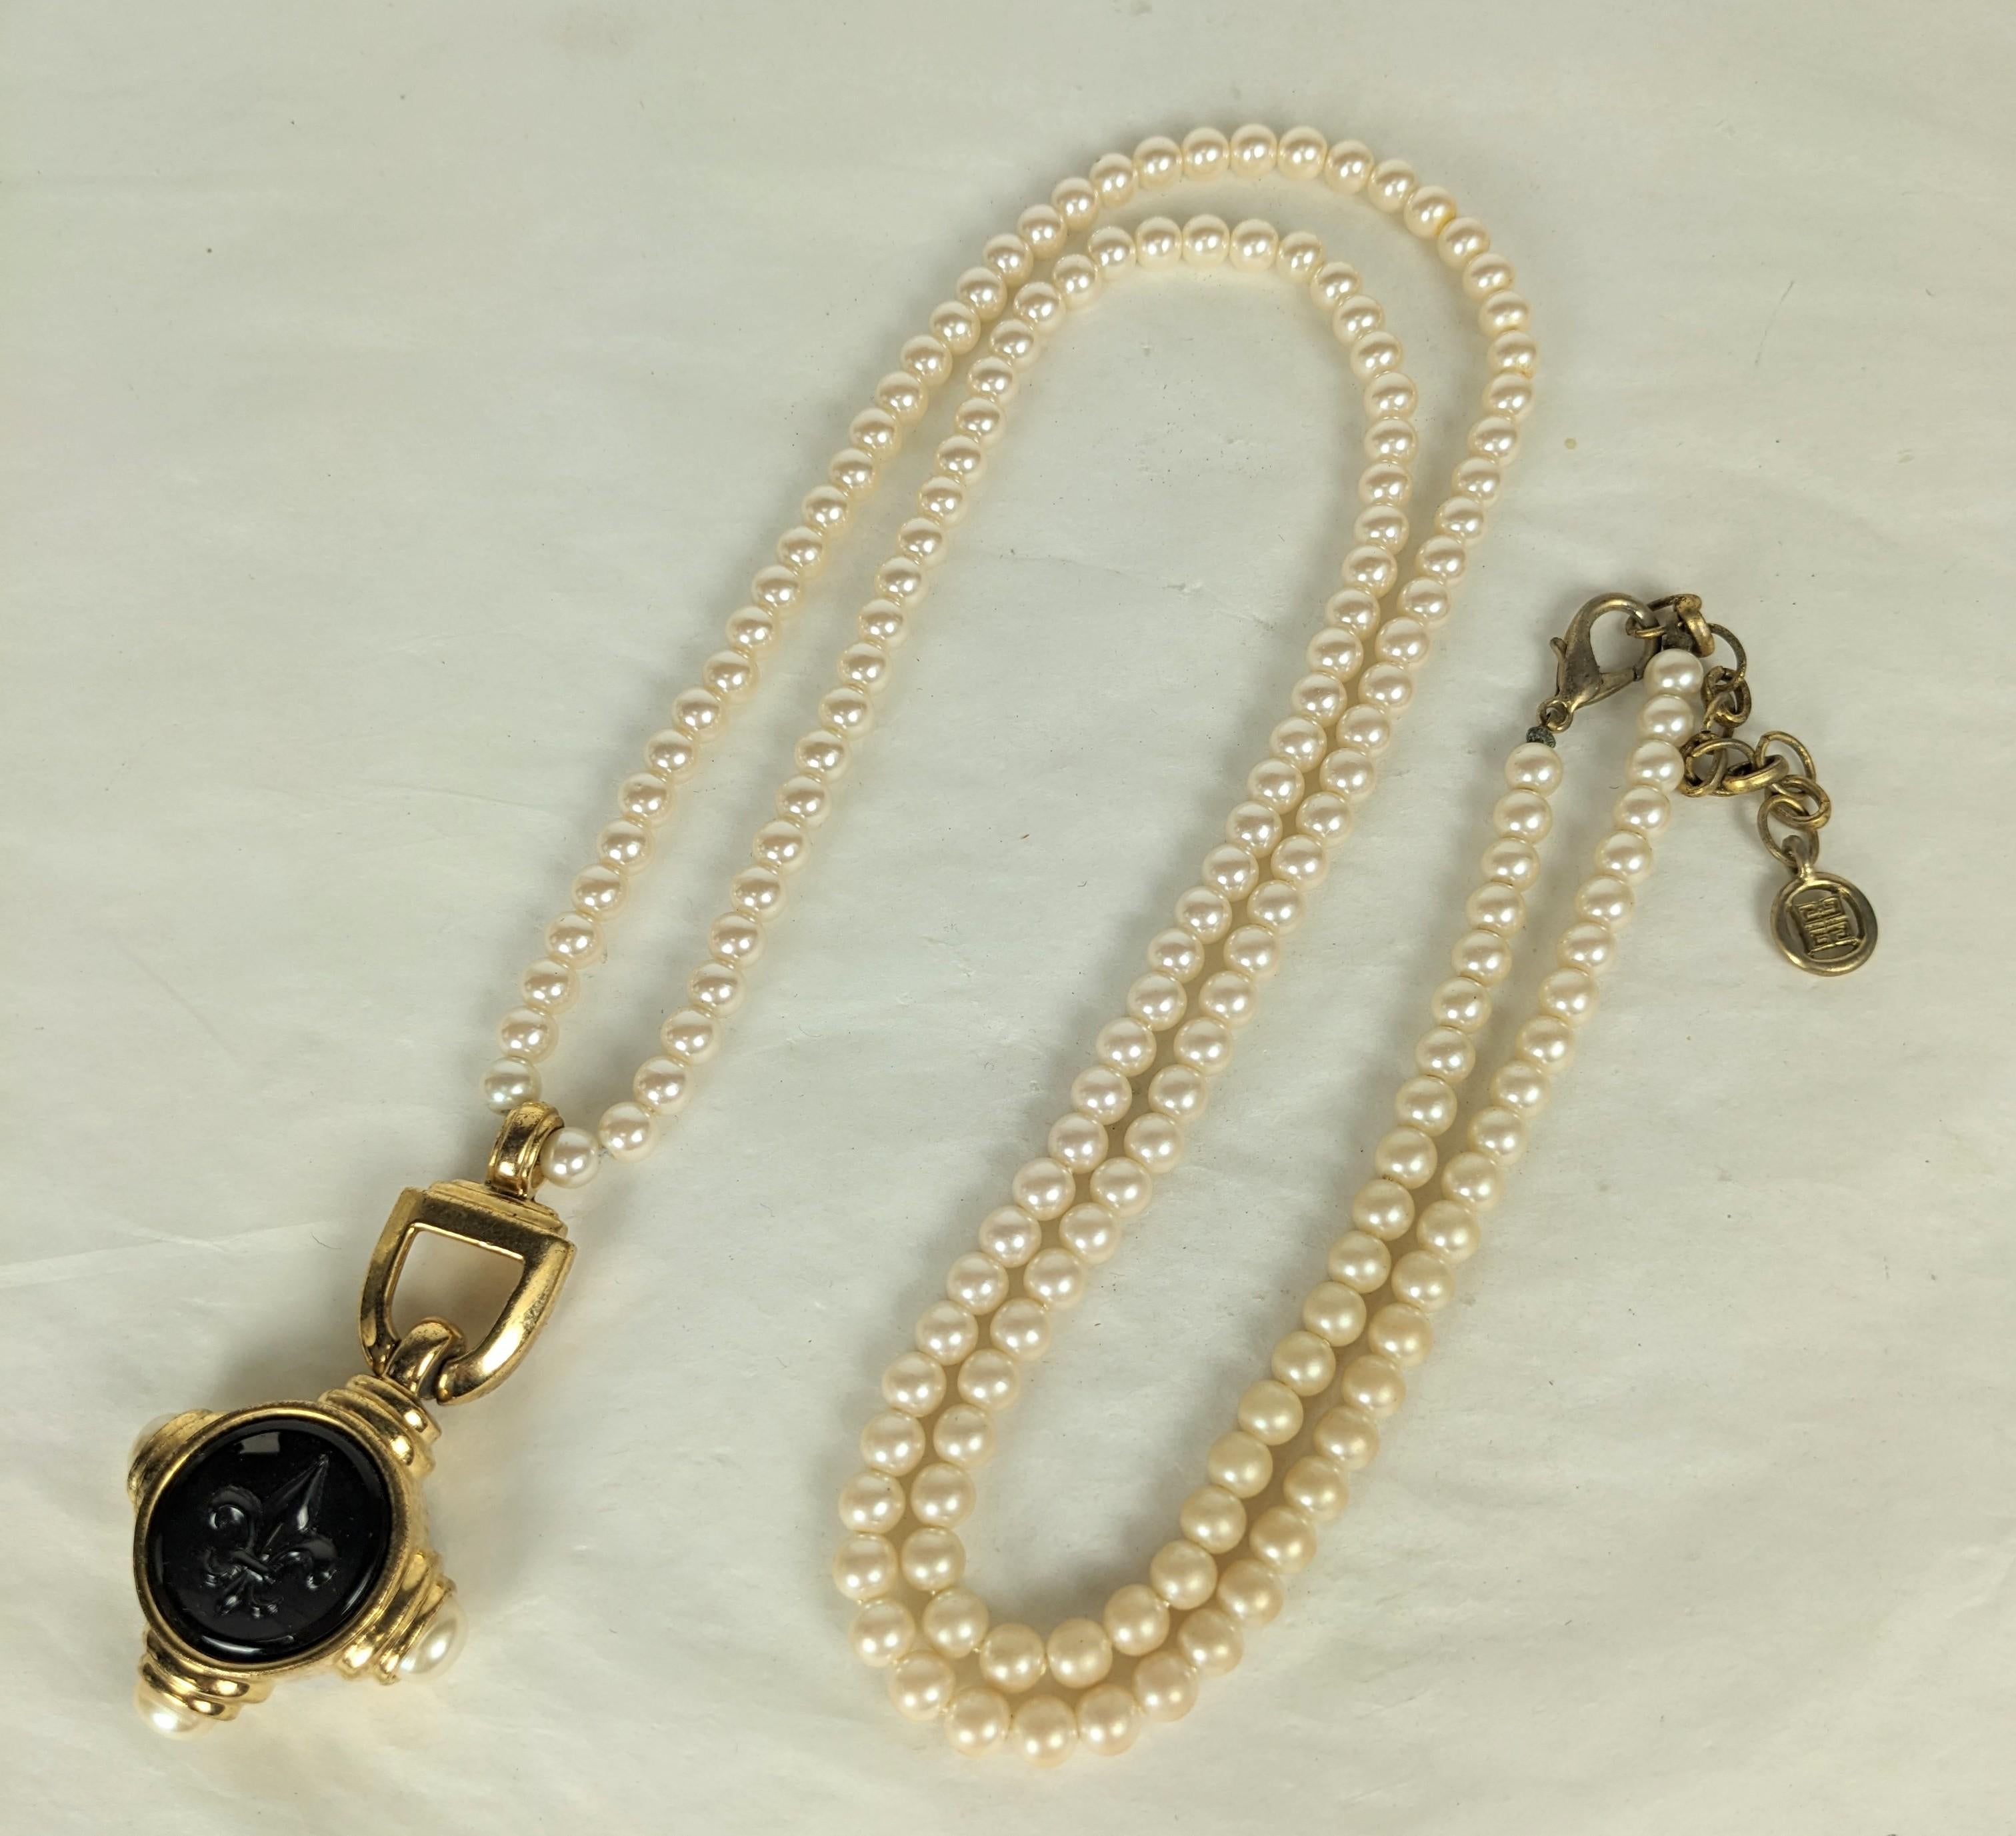 Givenchy Fleur de Lis Pearl Pendant Necklace from the 1990's. Long faux pearls of gilt pendant with glass fleur de lis cameo and faux pearls. Signed on pendant and clasp. 1990's France. 
Pendant 2.5